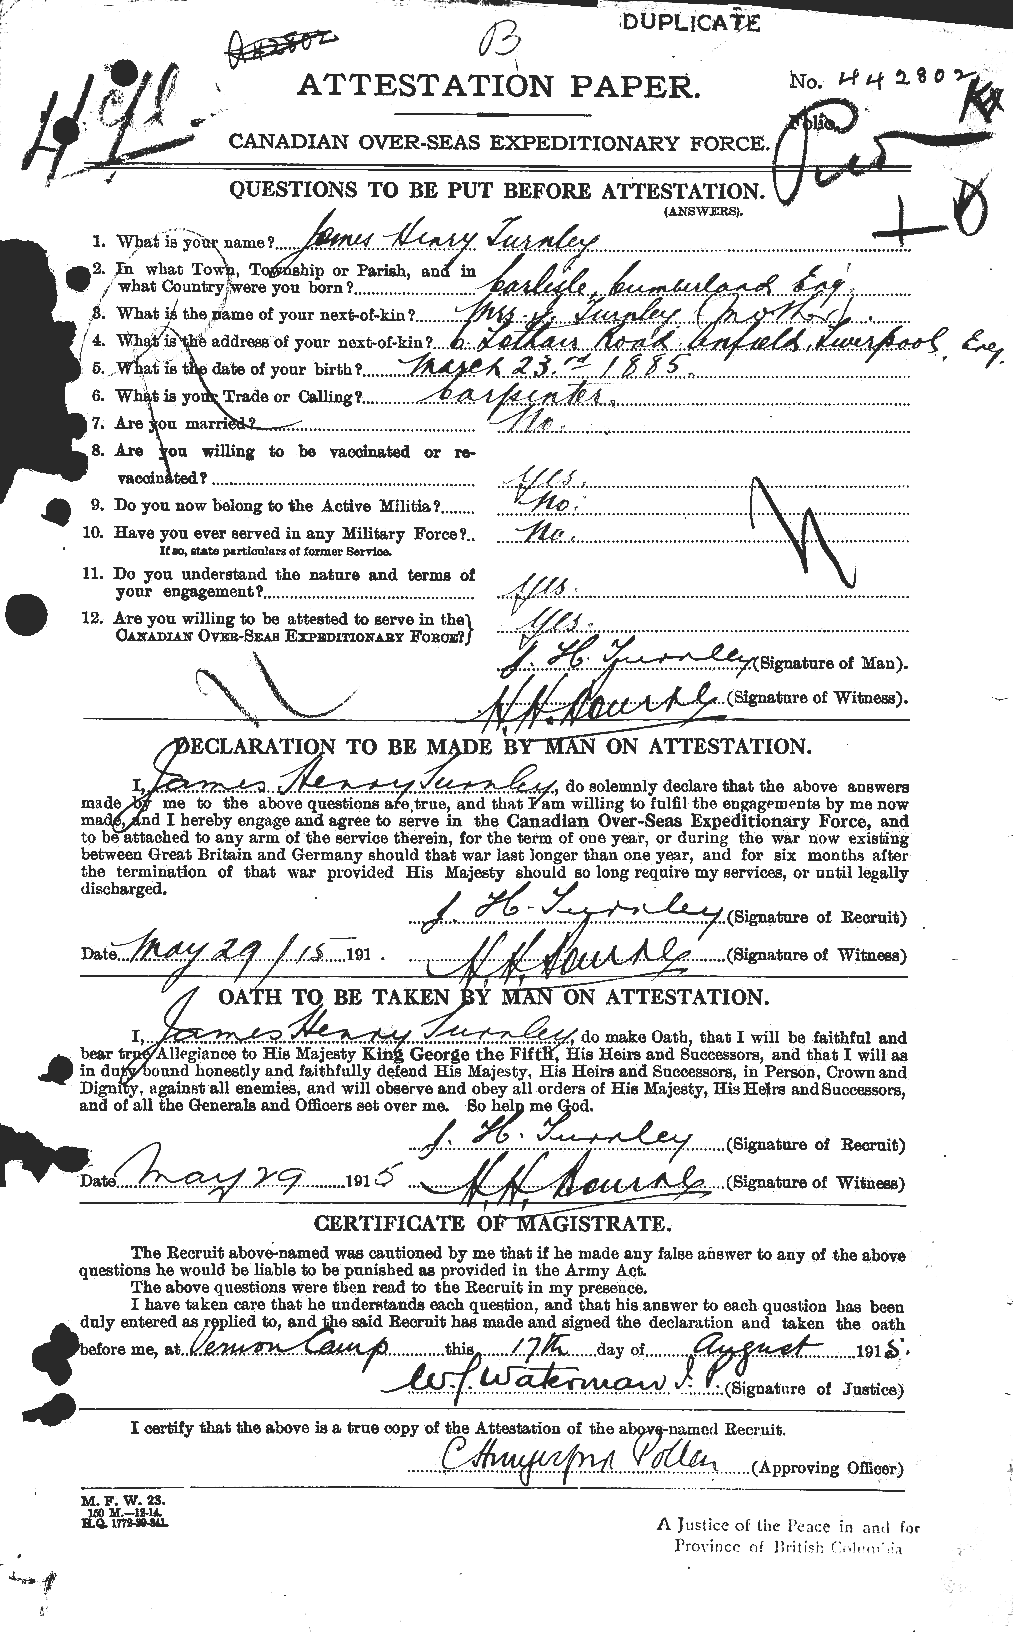 Personnel Records of the First World War - CEF 644097a